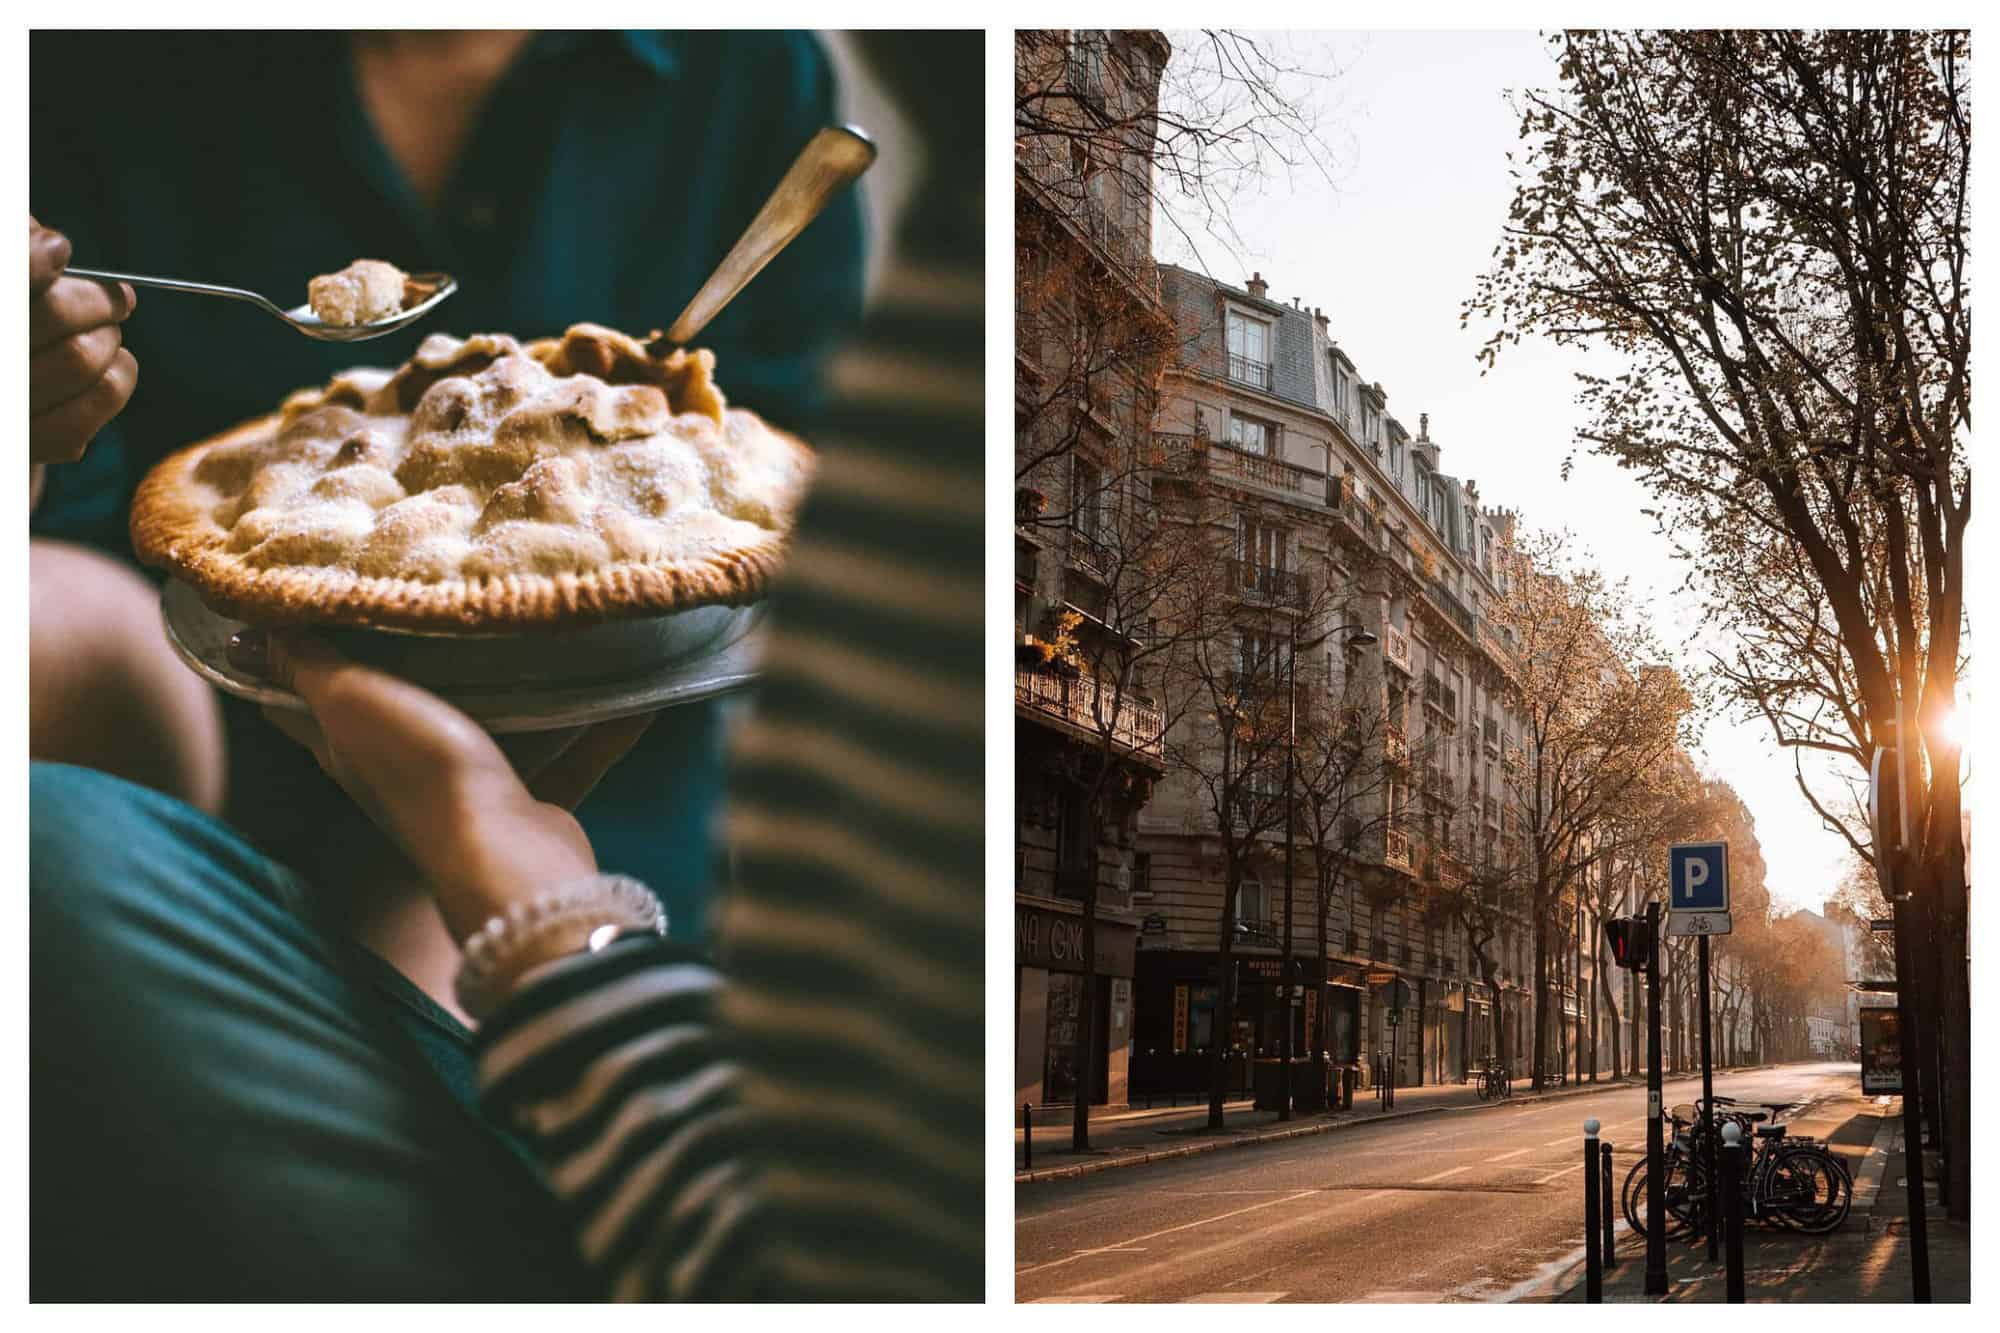 Left: Someone is handling a baked pumpkin pie during a Thanksgiving meal. Right: A quiet Parisian street without cars during sunset.